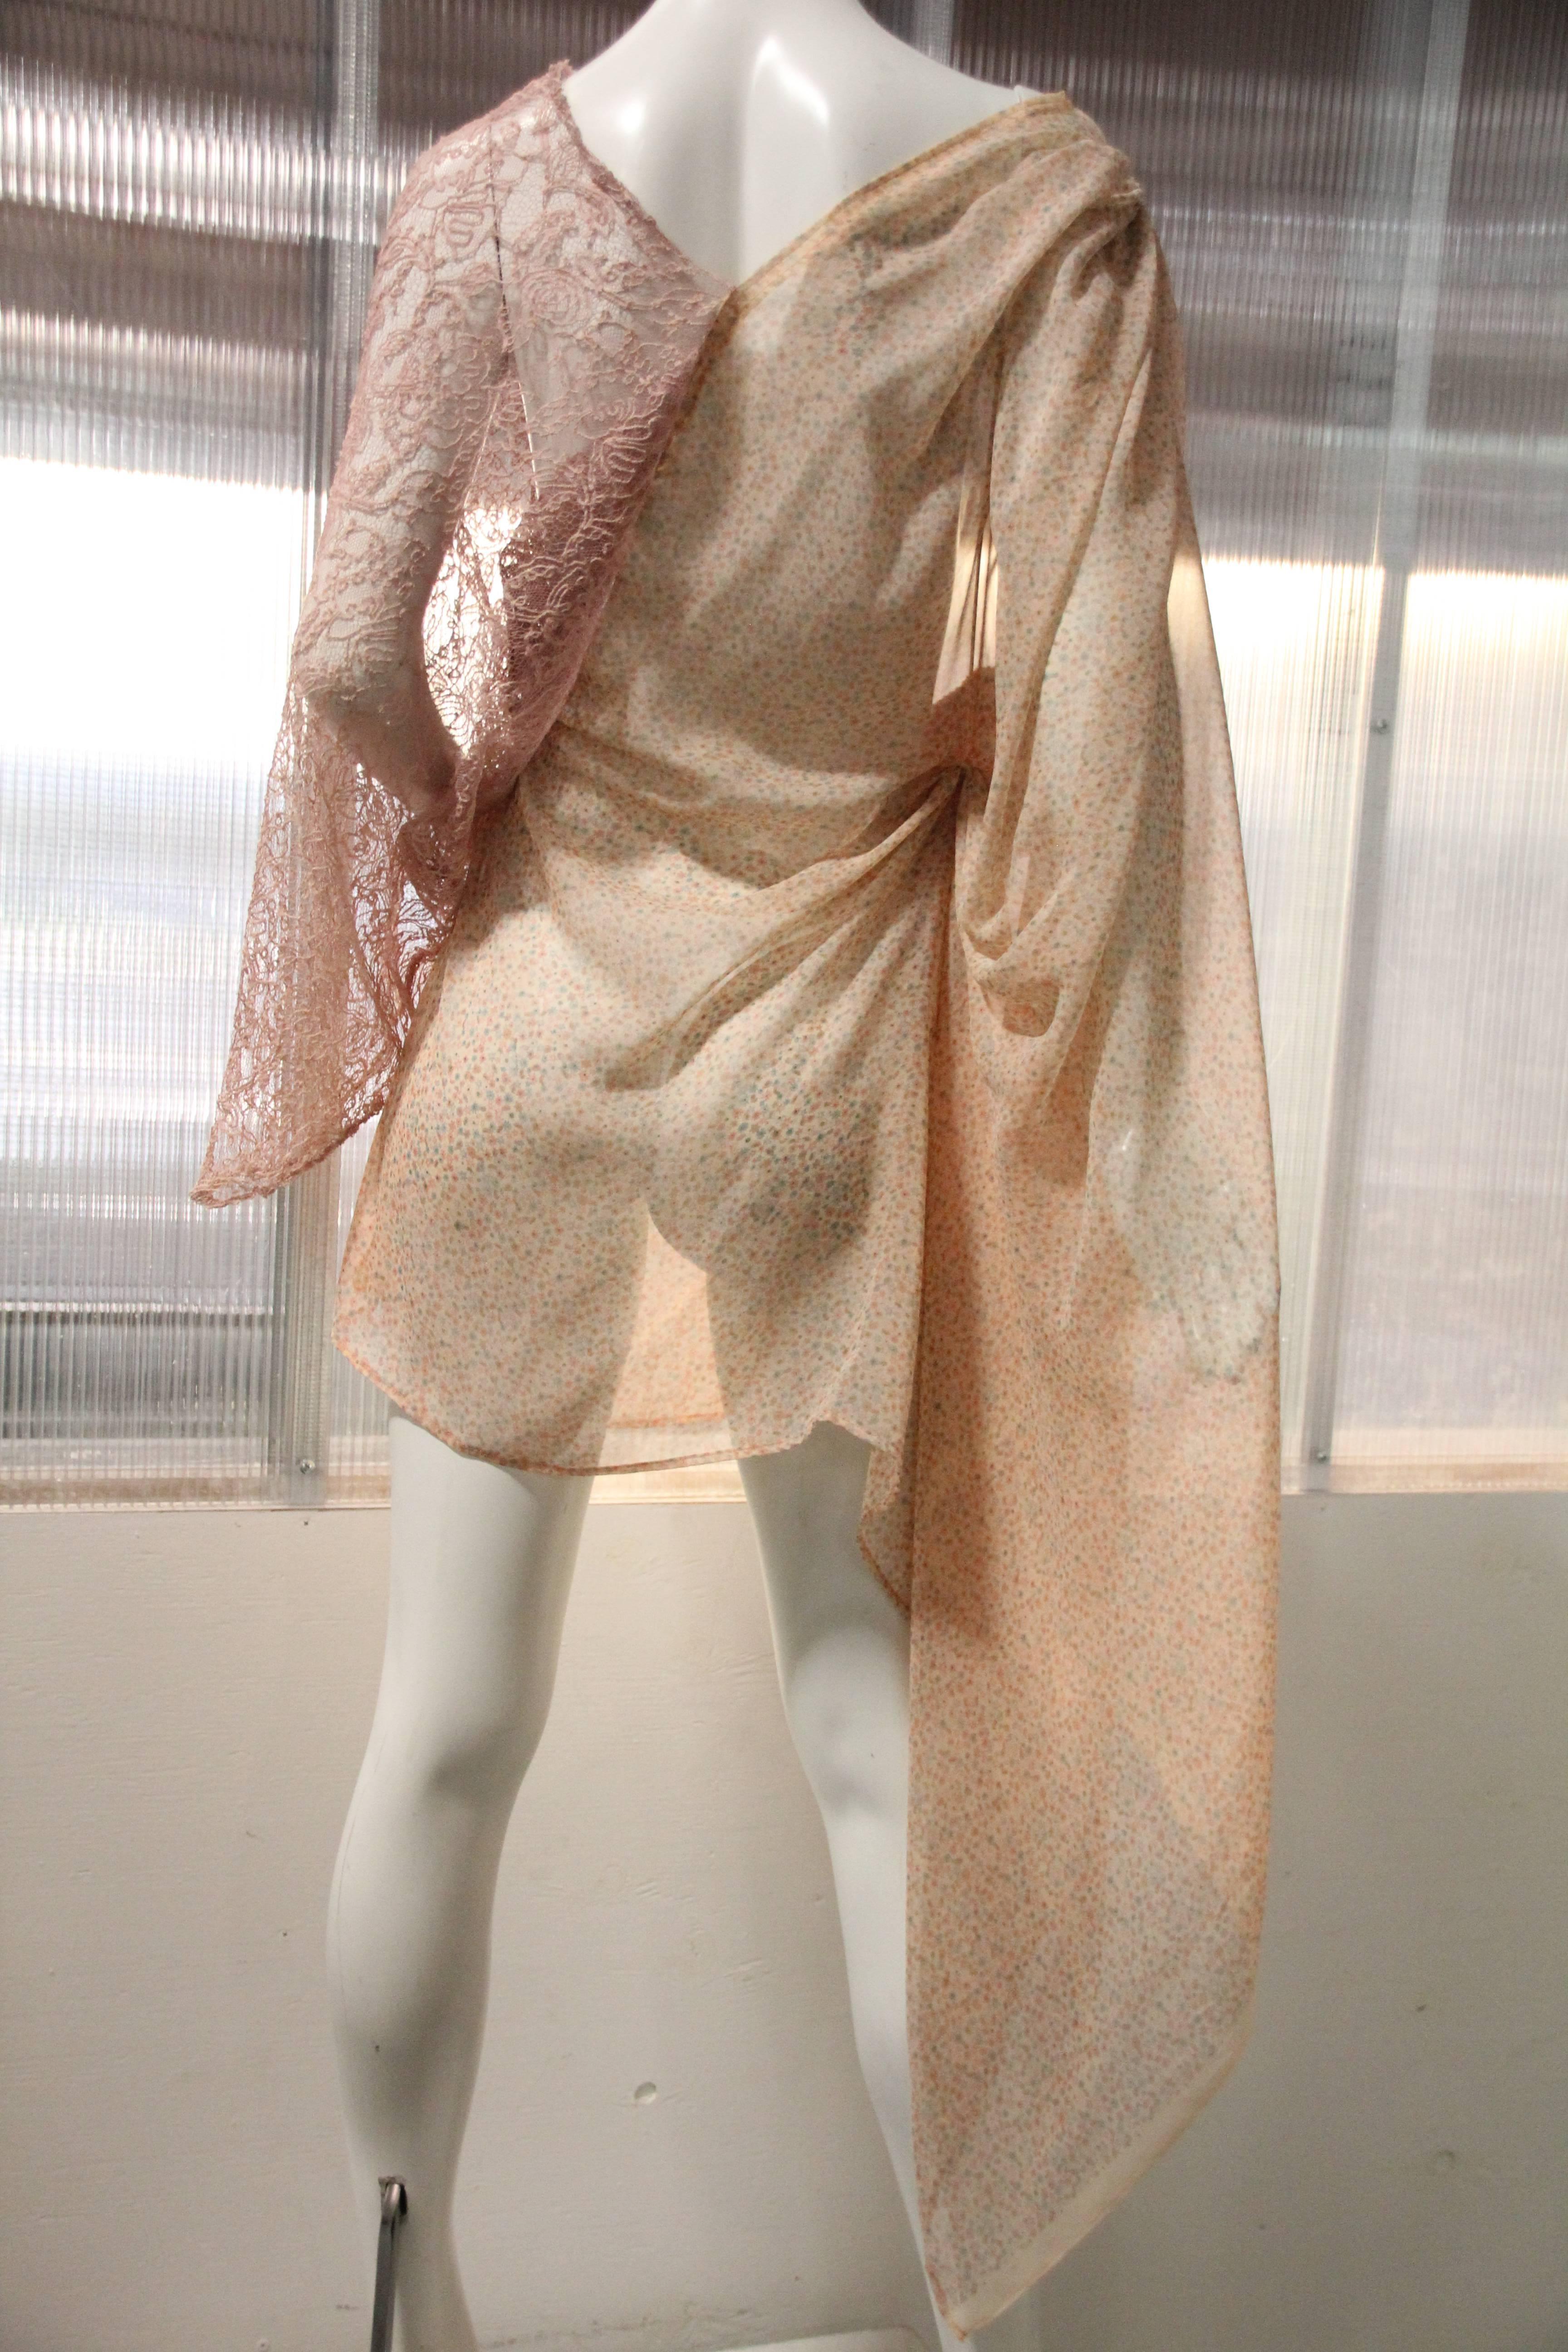 Women's Custom-Made Floral-Print Chiffon and Lace Asymmetrical Tunic w 1920s Applique